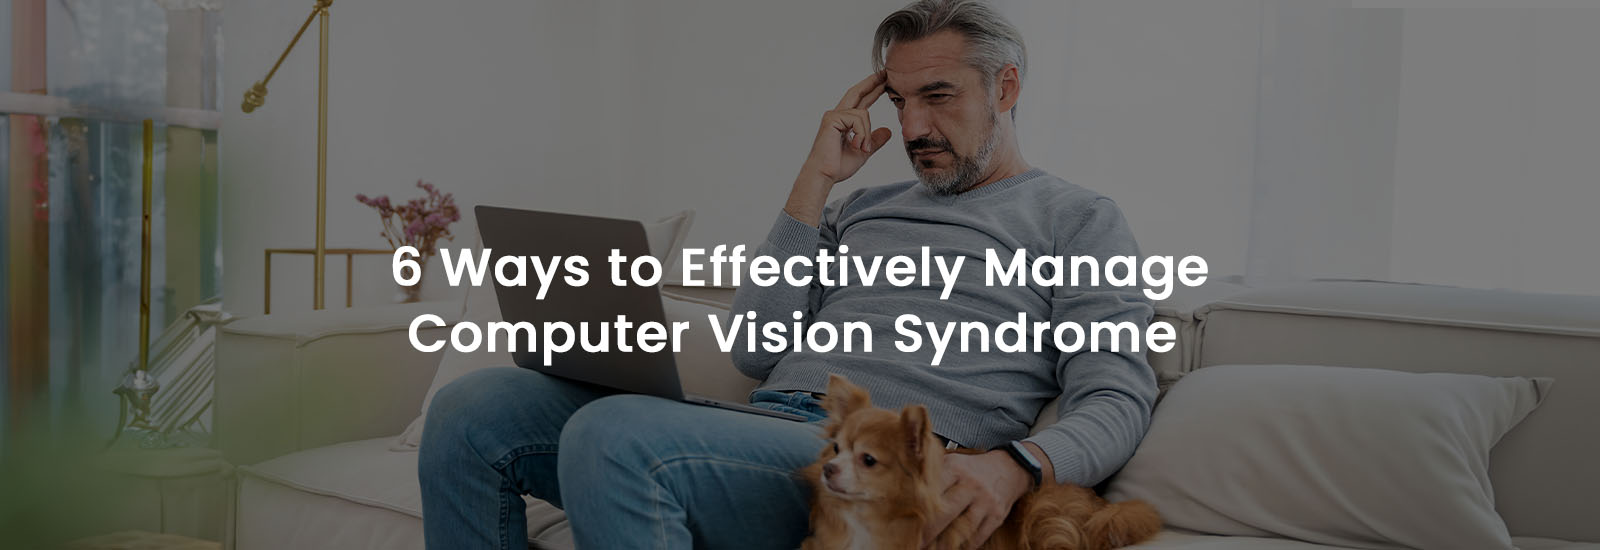 6 Ways to Effectively Manage Computer Vision Syndrome | Banner Image